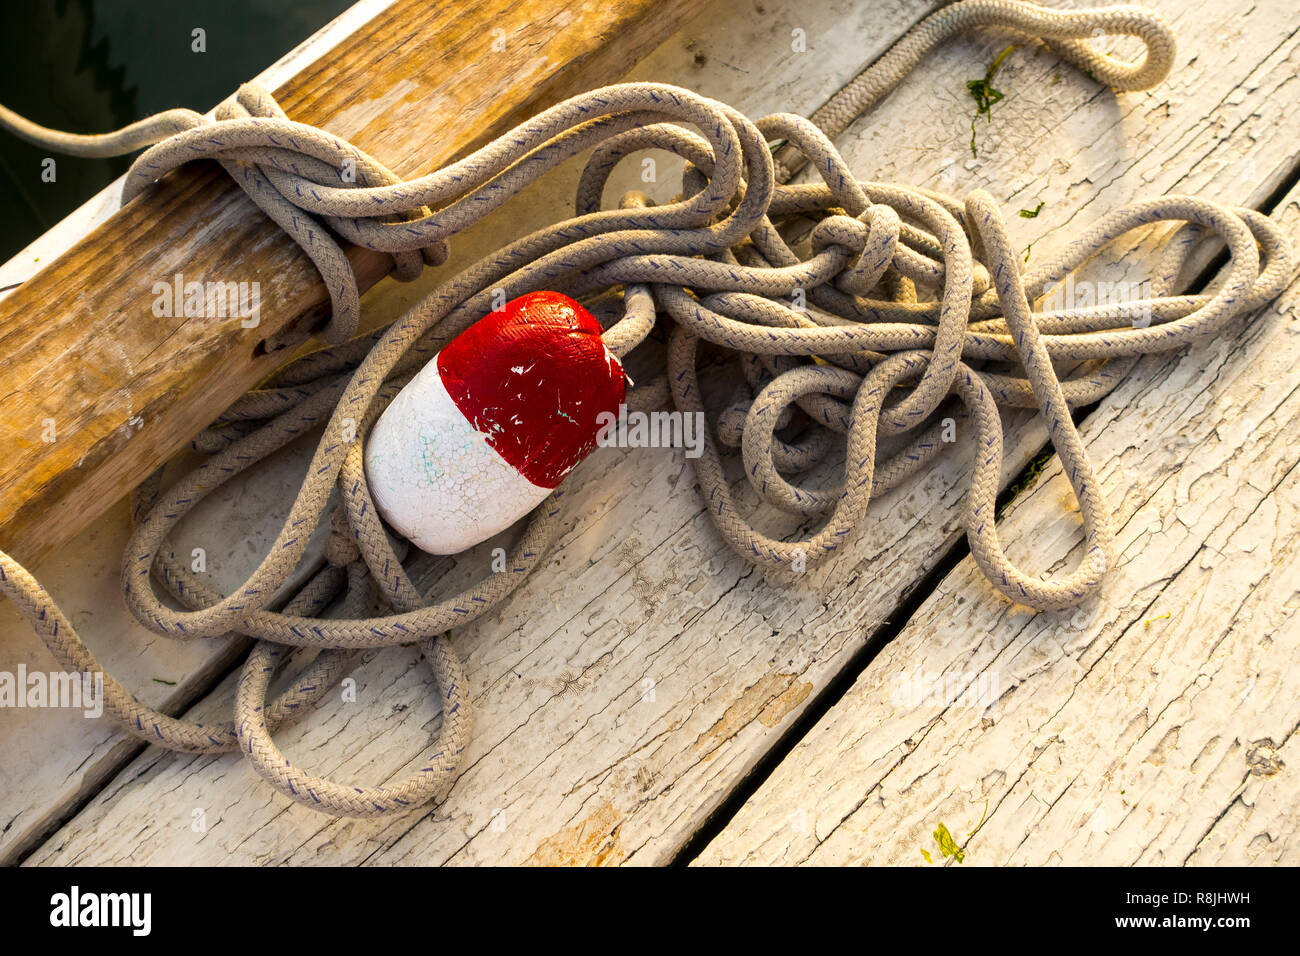 old fishing rope with floating red white buoy on a wooden dec or